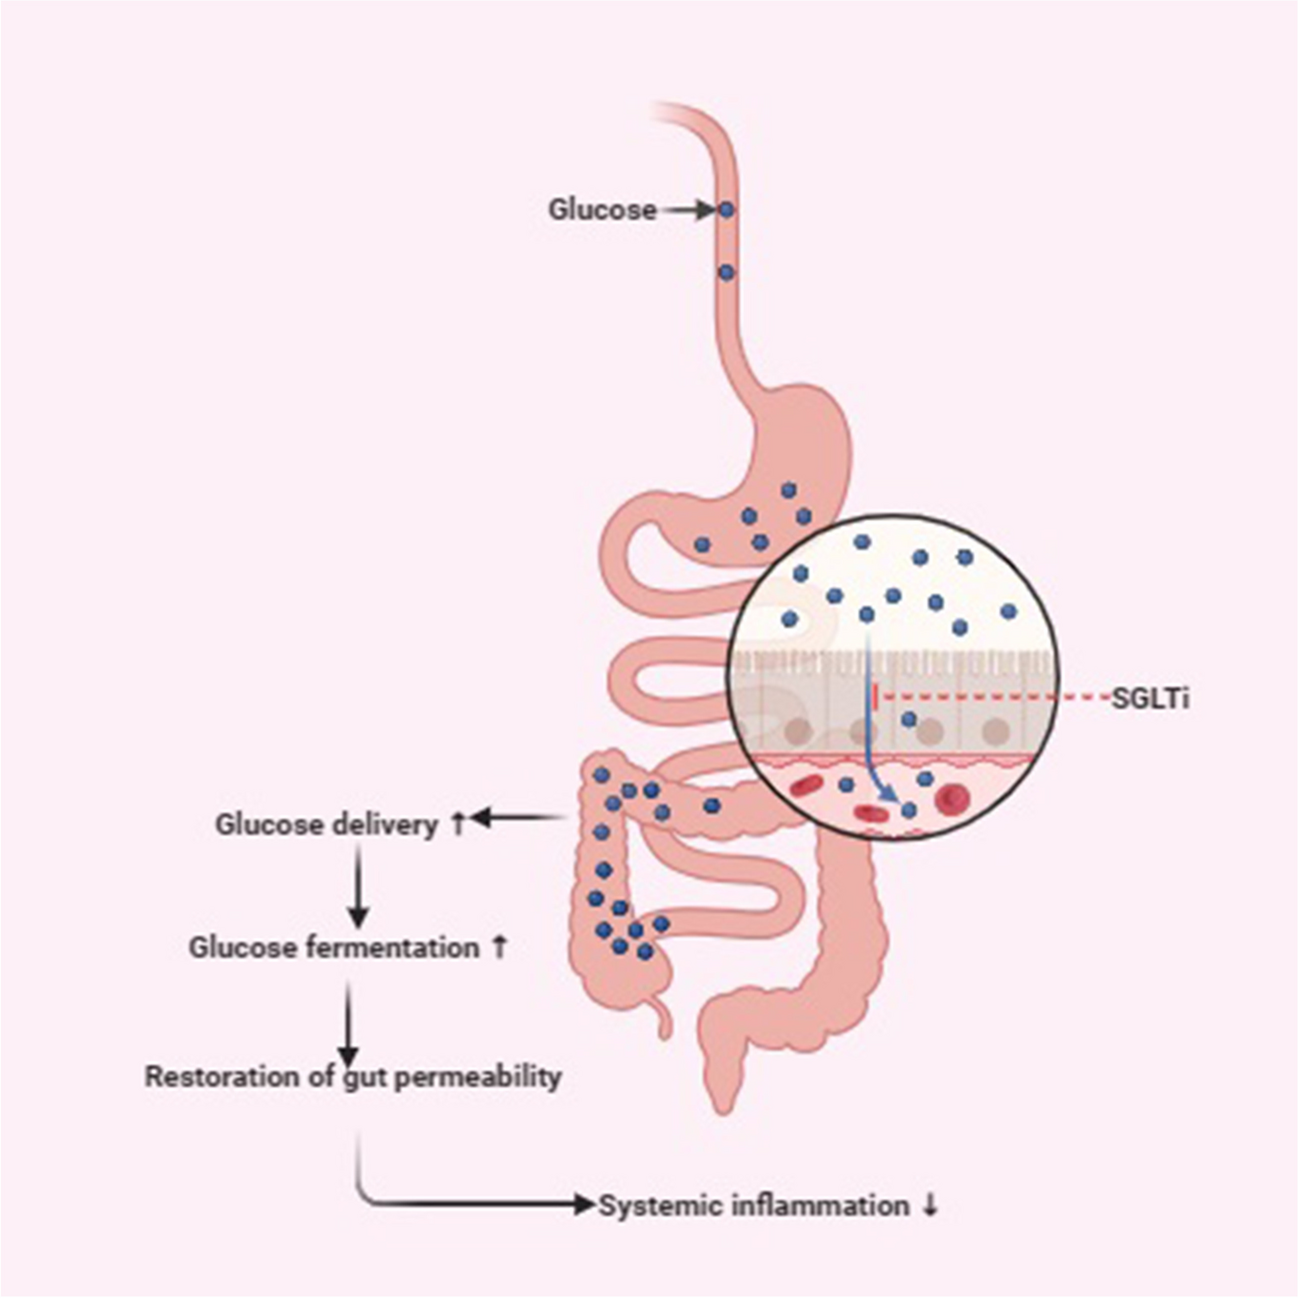 The impact of sodium-glucose cotransporter inhibitors on gut microbiota: a scoping review